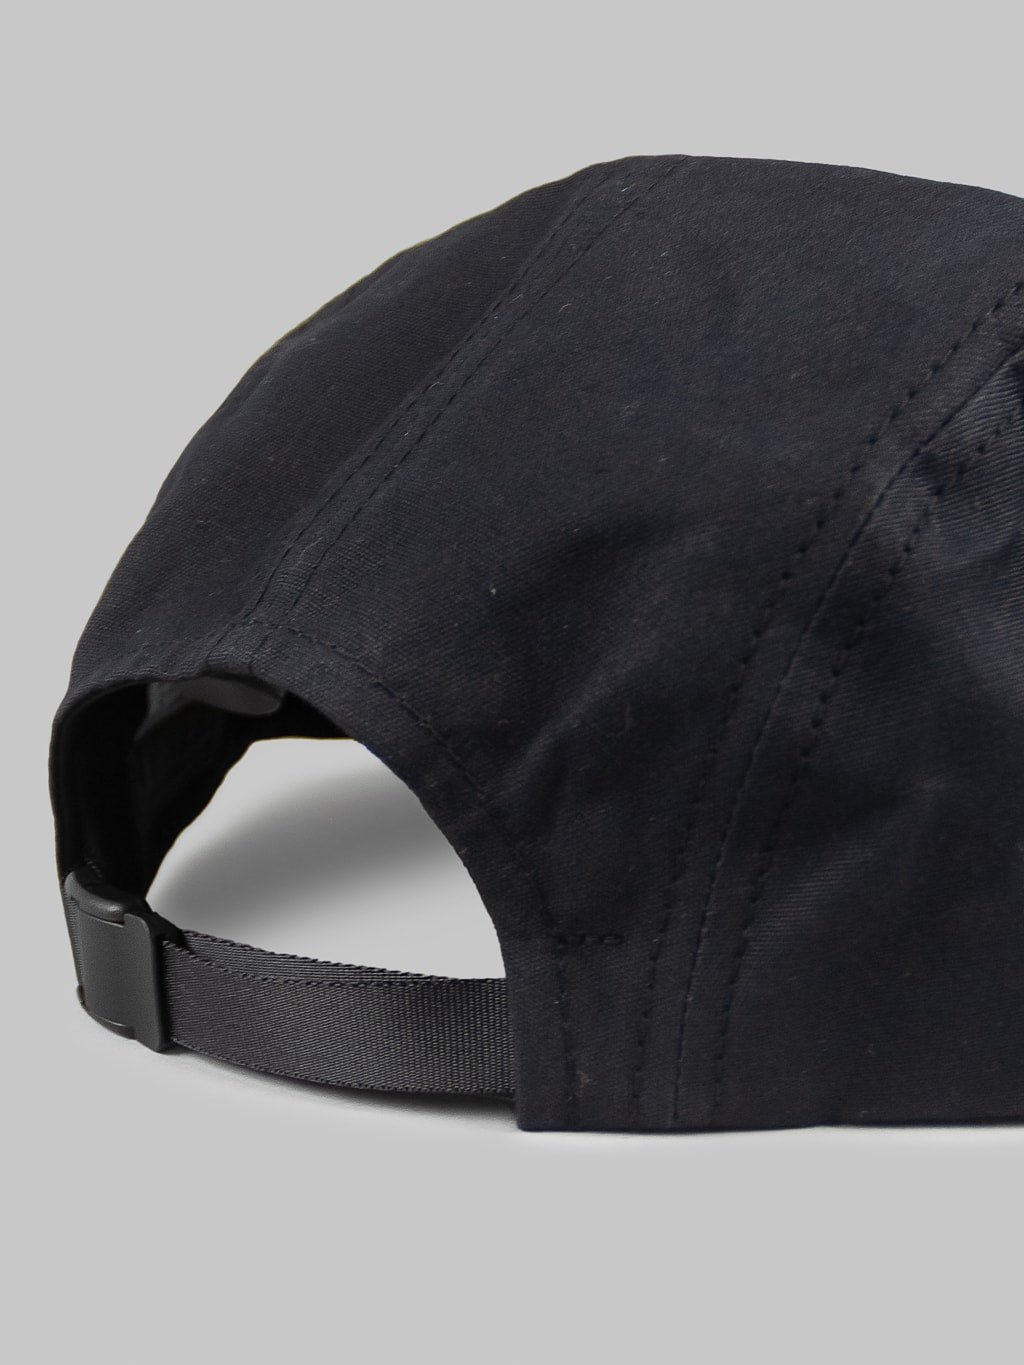 Mighty Shine Paraffin OX 4 Panel Cap Black  back side